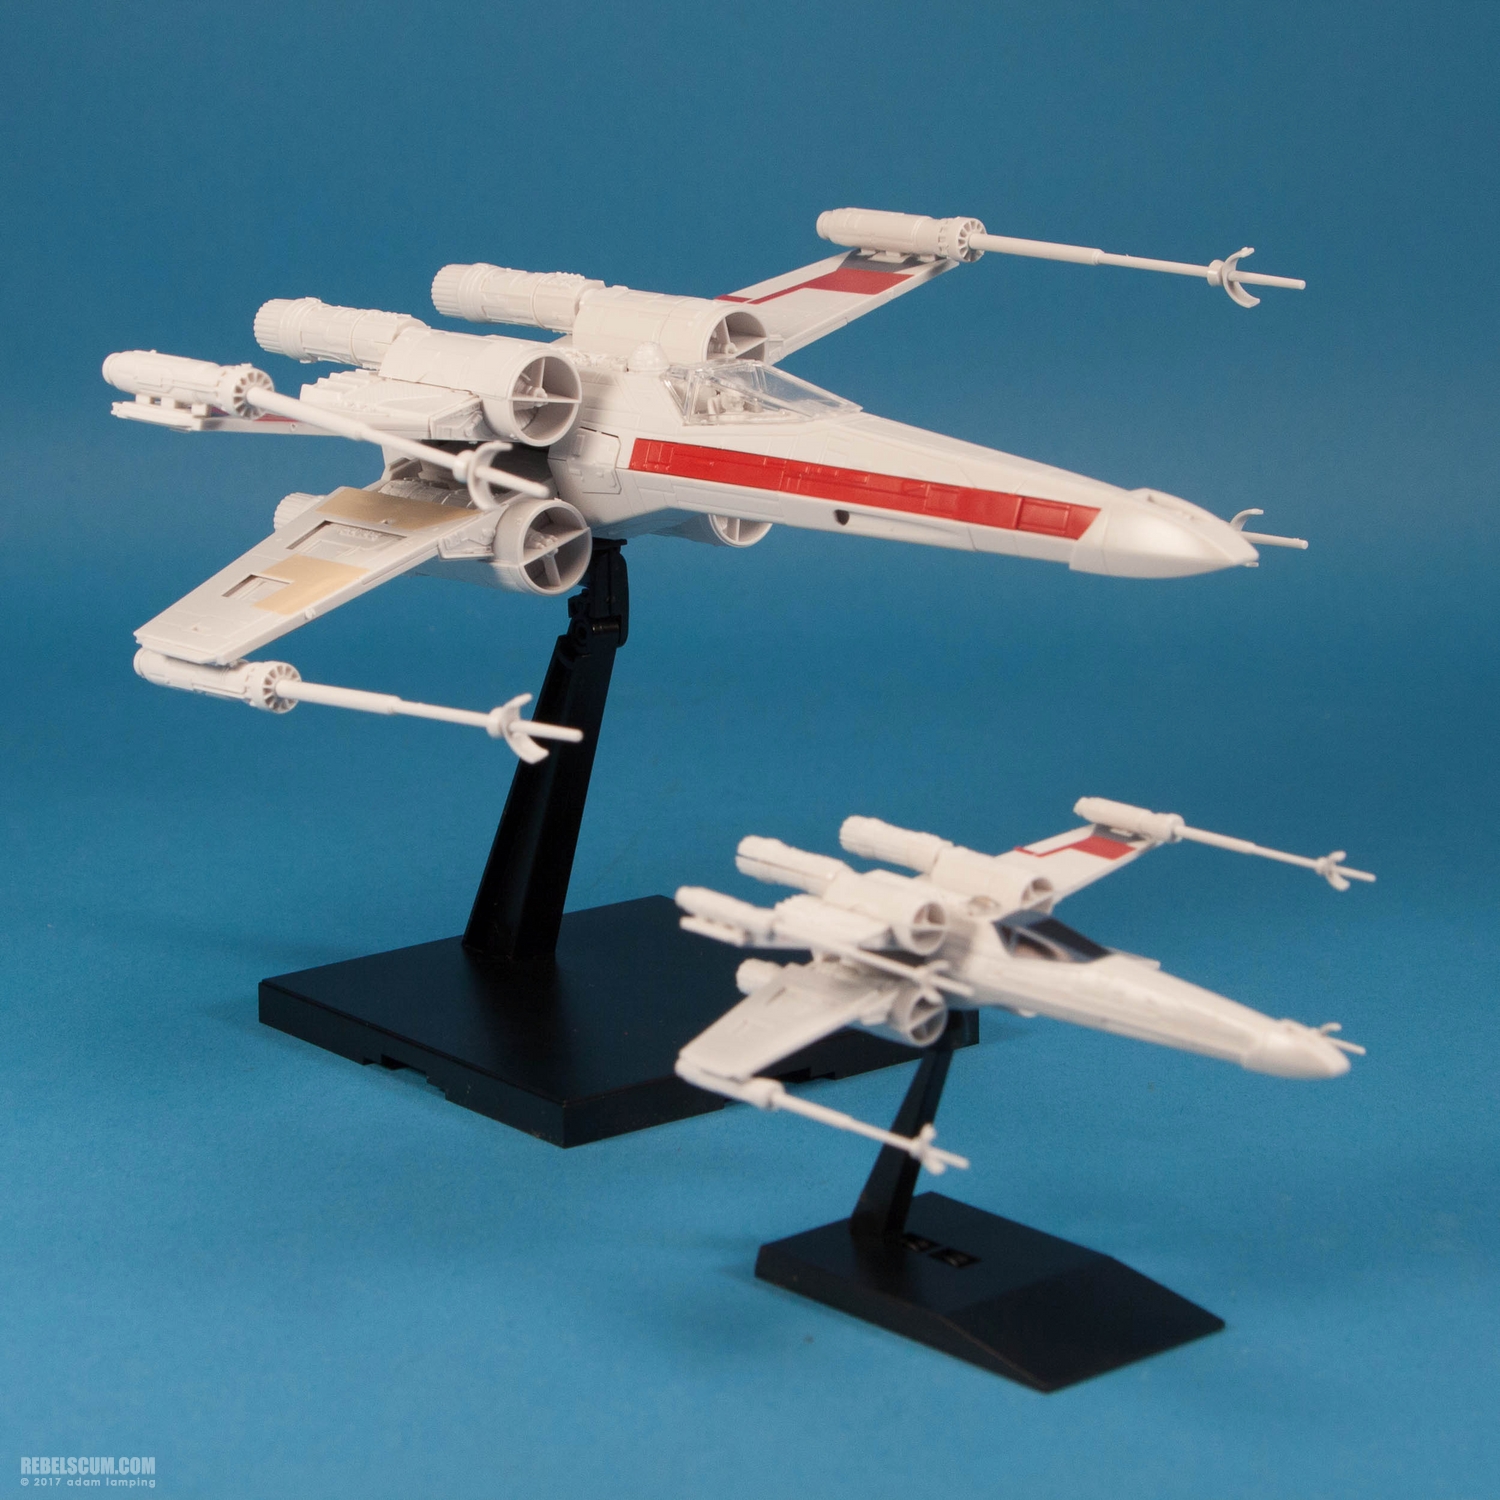 bandai-red-squadron-x-wing-starfighter-scale-model-kit-026.jpg